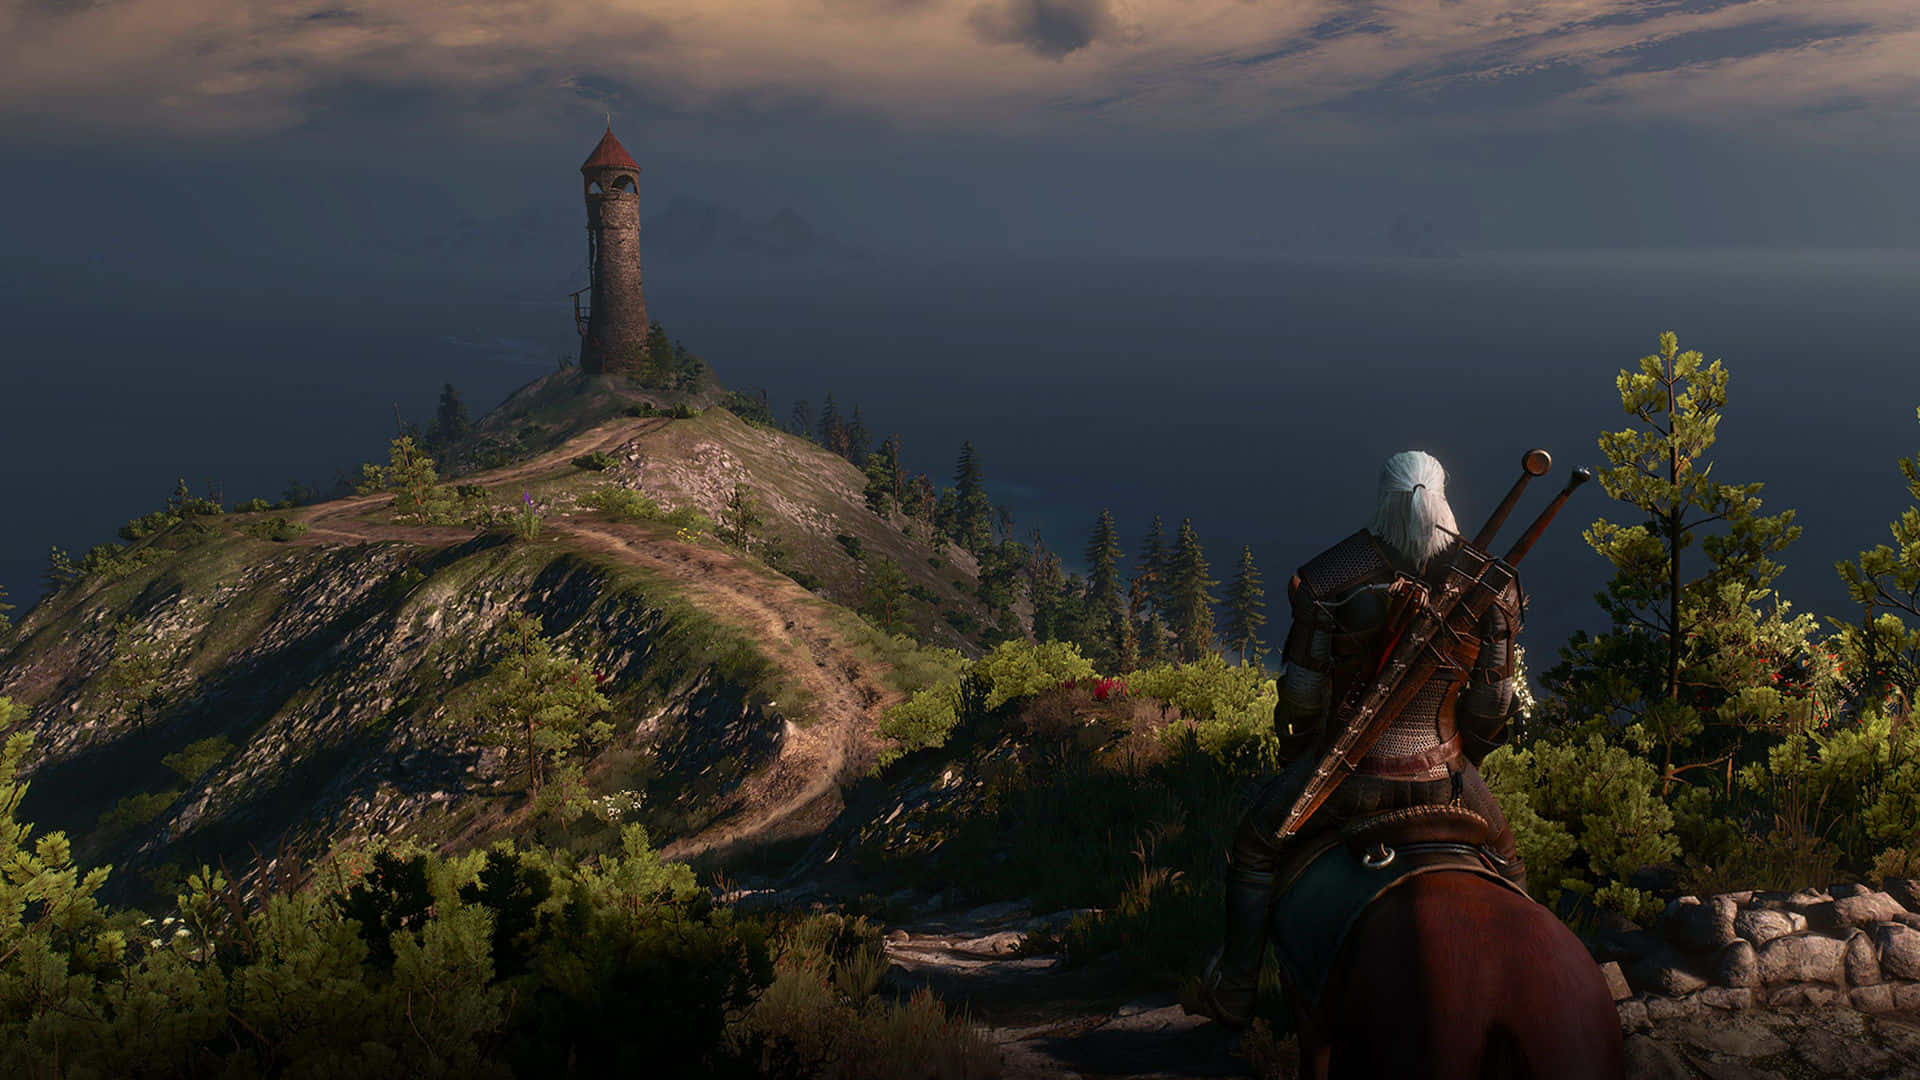 A world of adventure awaits in The Witcher 3: Wild Hunt